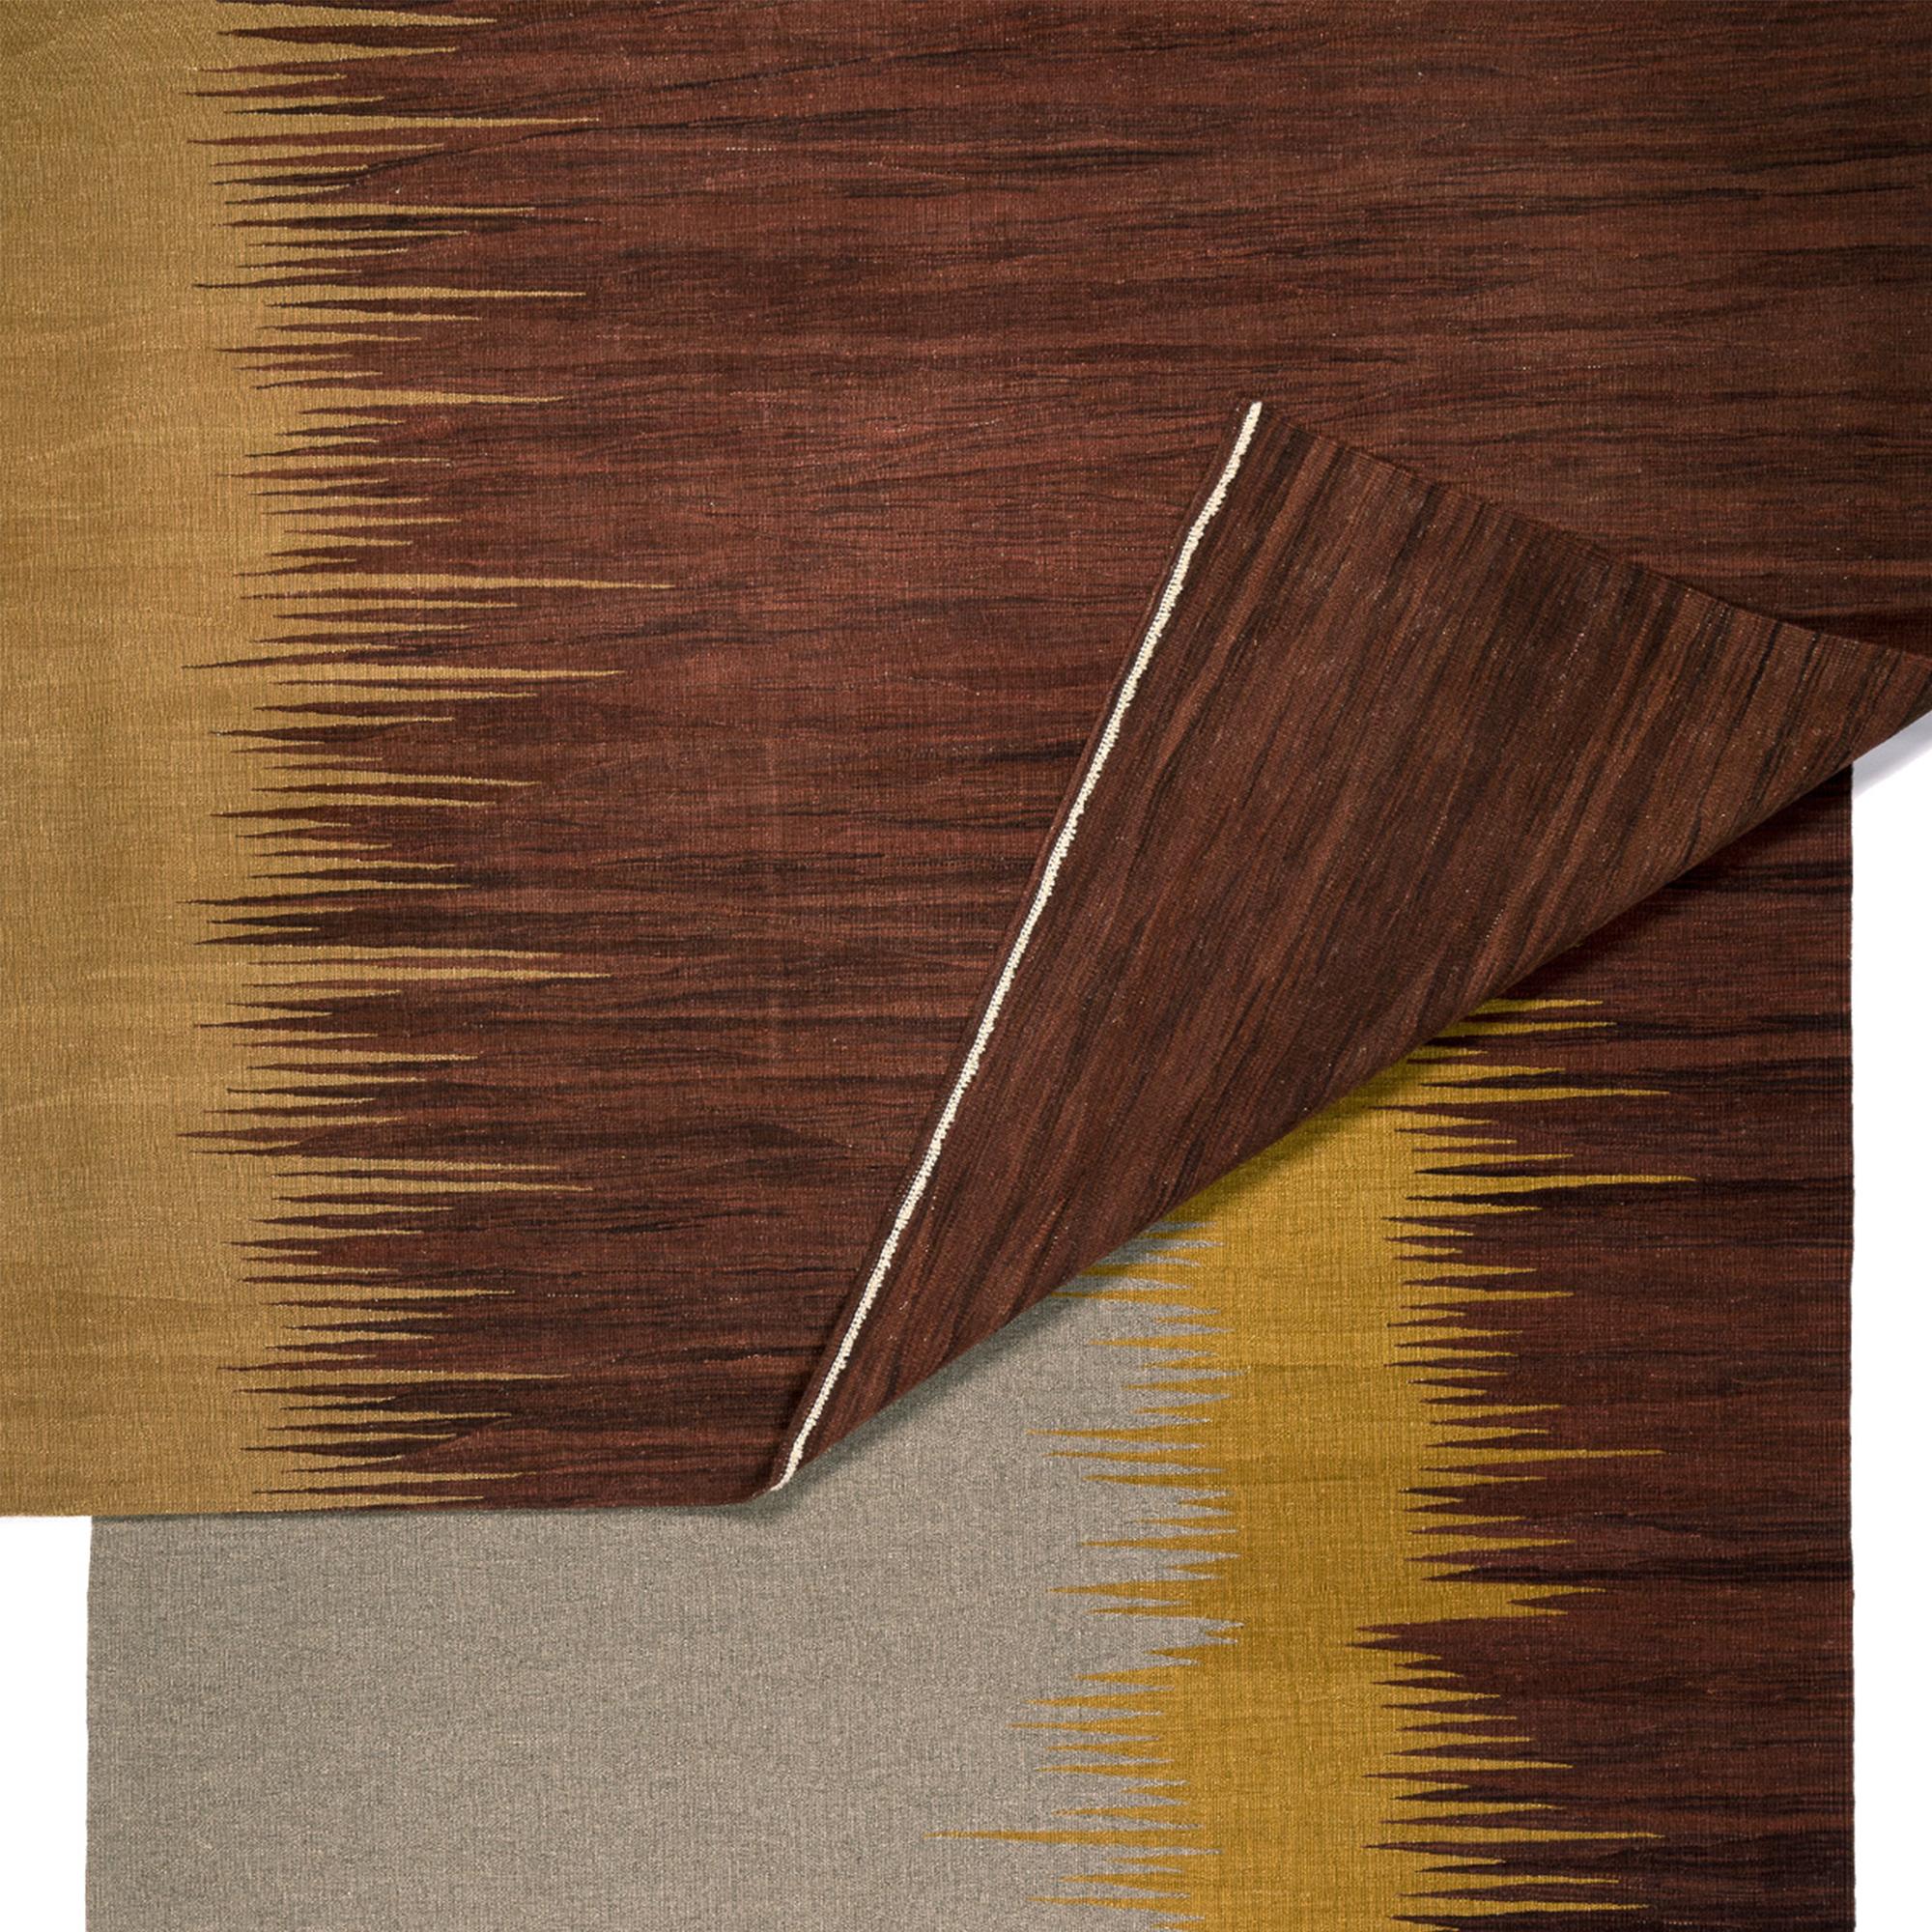 Yakamoz No 1 kilim rug is part of a series of kilims that take their inspiration from the poetry of light reflections on the sea surface. The abstract patterns, which are reminiscent of alternating color transitions created by reflected light, are